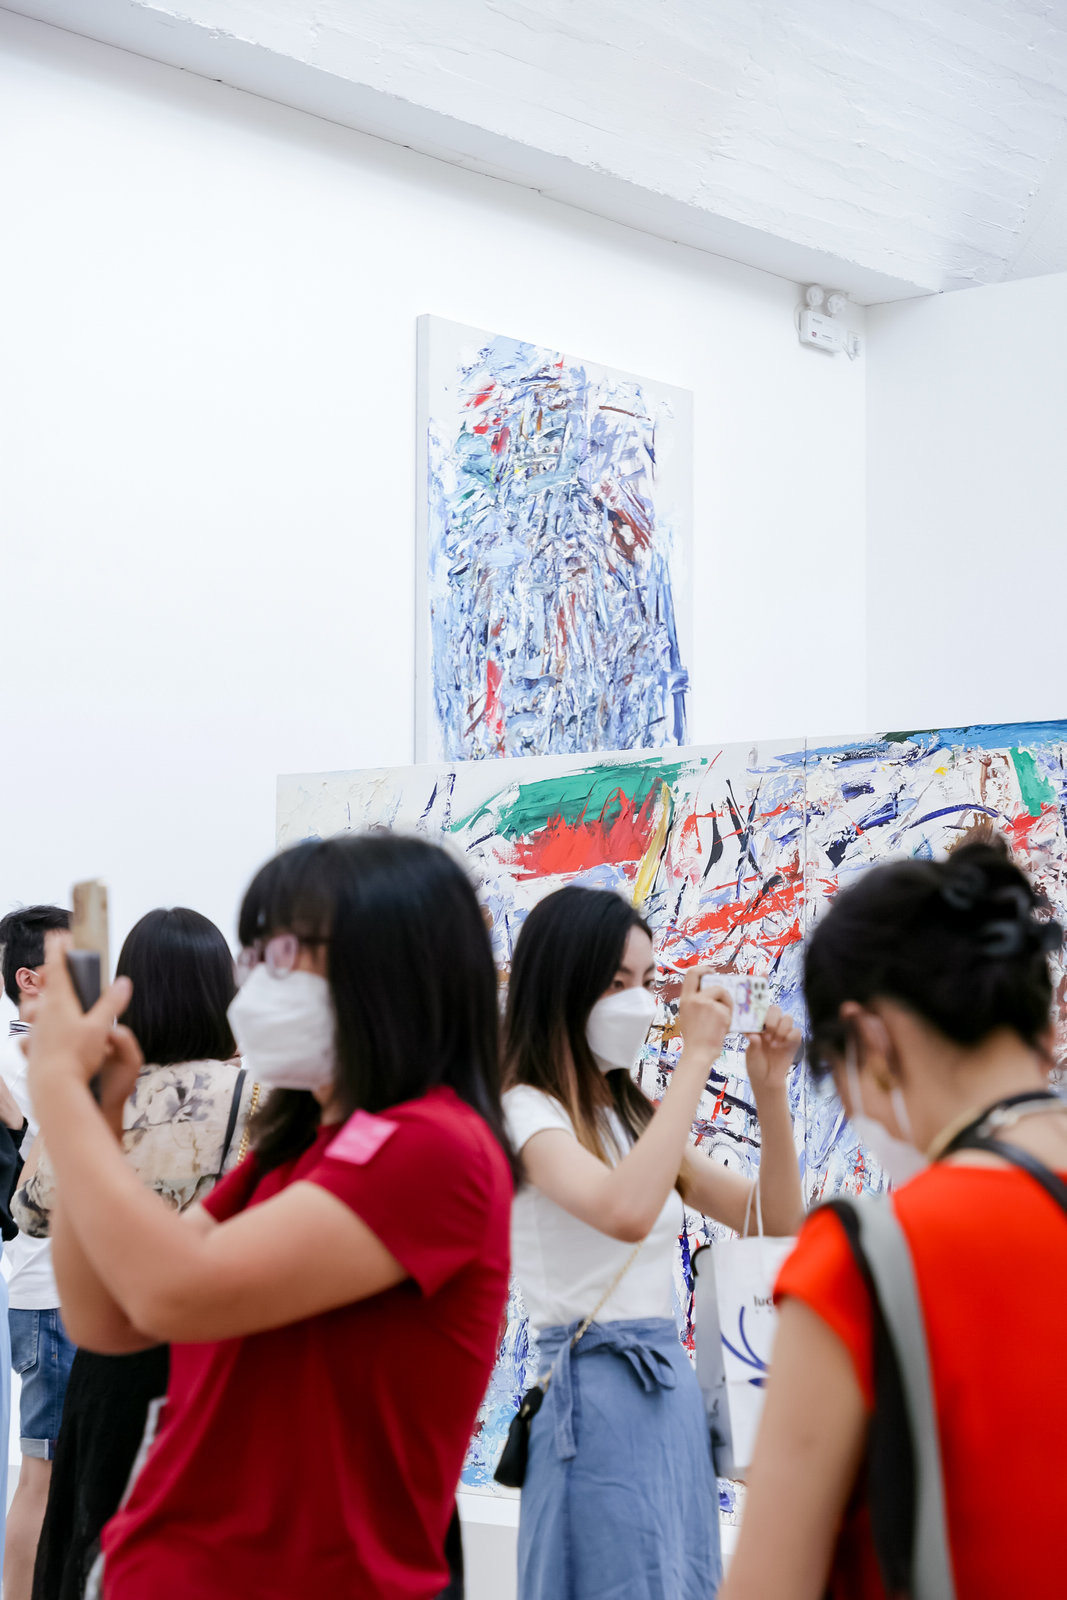 Visitors take photos at the sixth edition of Gallery Weekend Beijing, held from June 28-July 3, after the Chinese capital’s major art districts were closed for most of May. The event presented nearly 40 exhibitions and was attended by over 120,000 physical visitors. Photo: Gallery Weekend Beijing